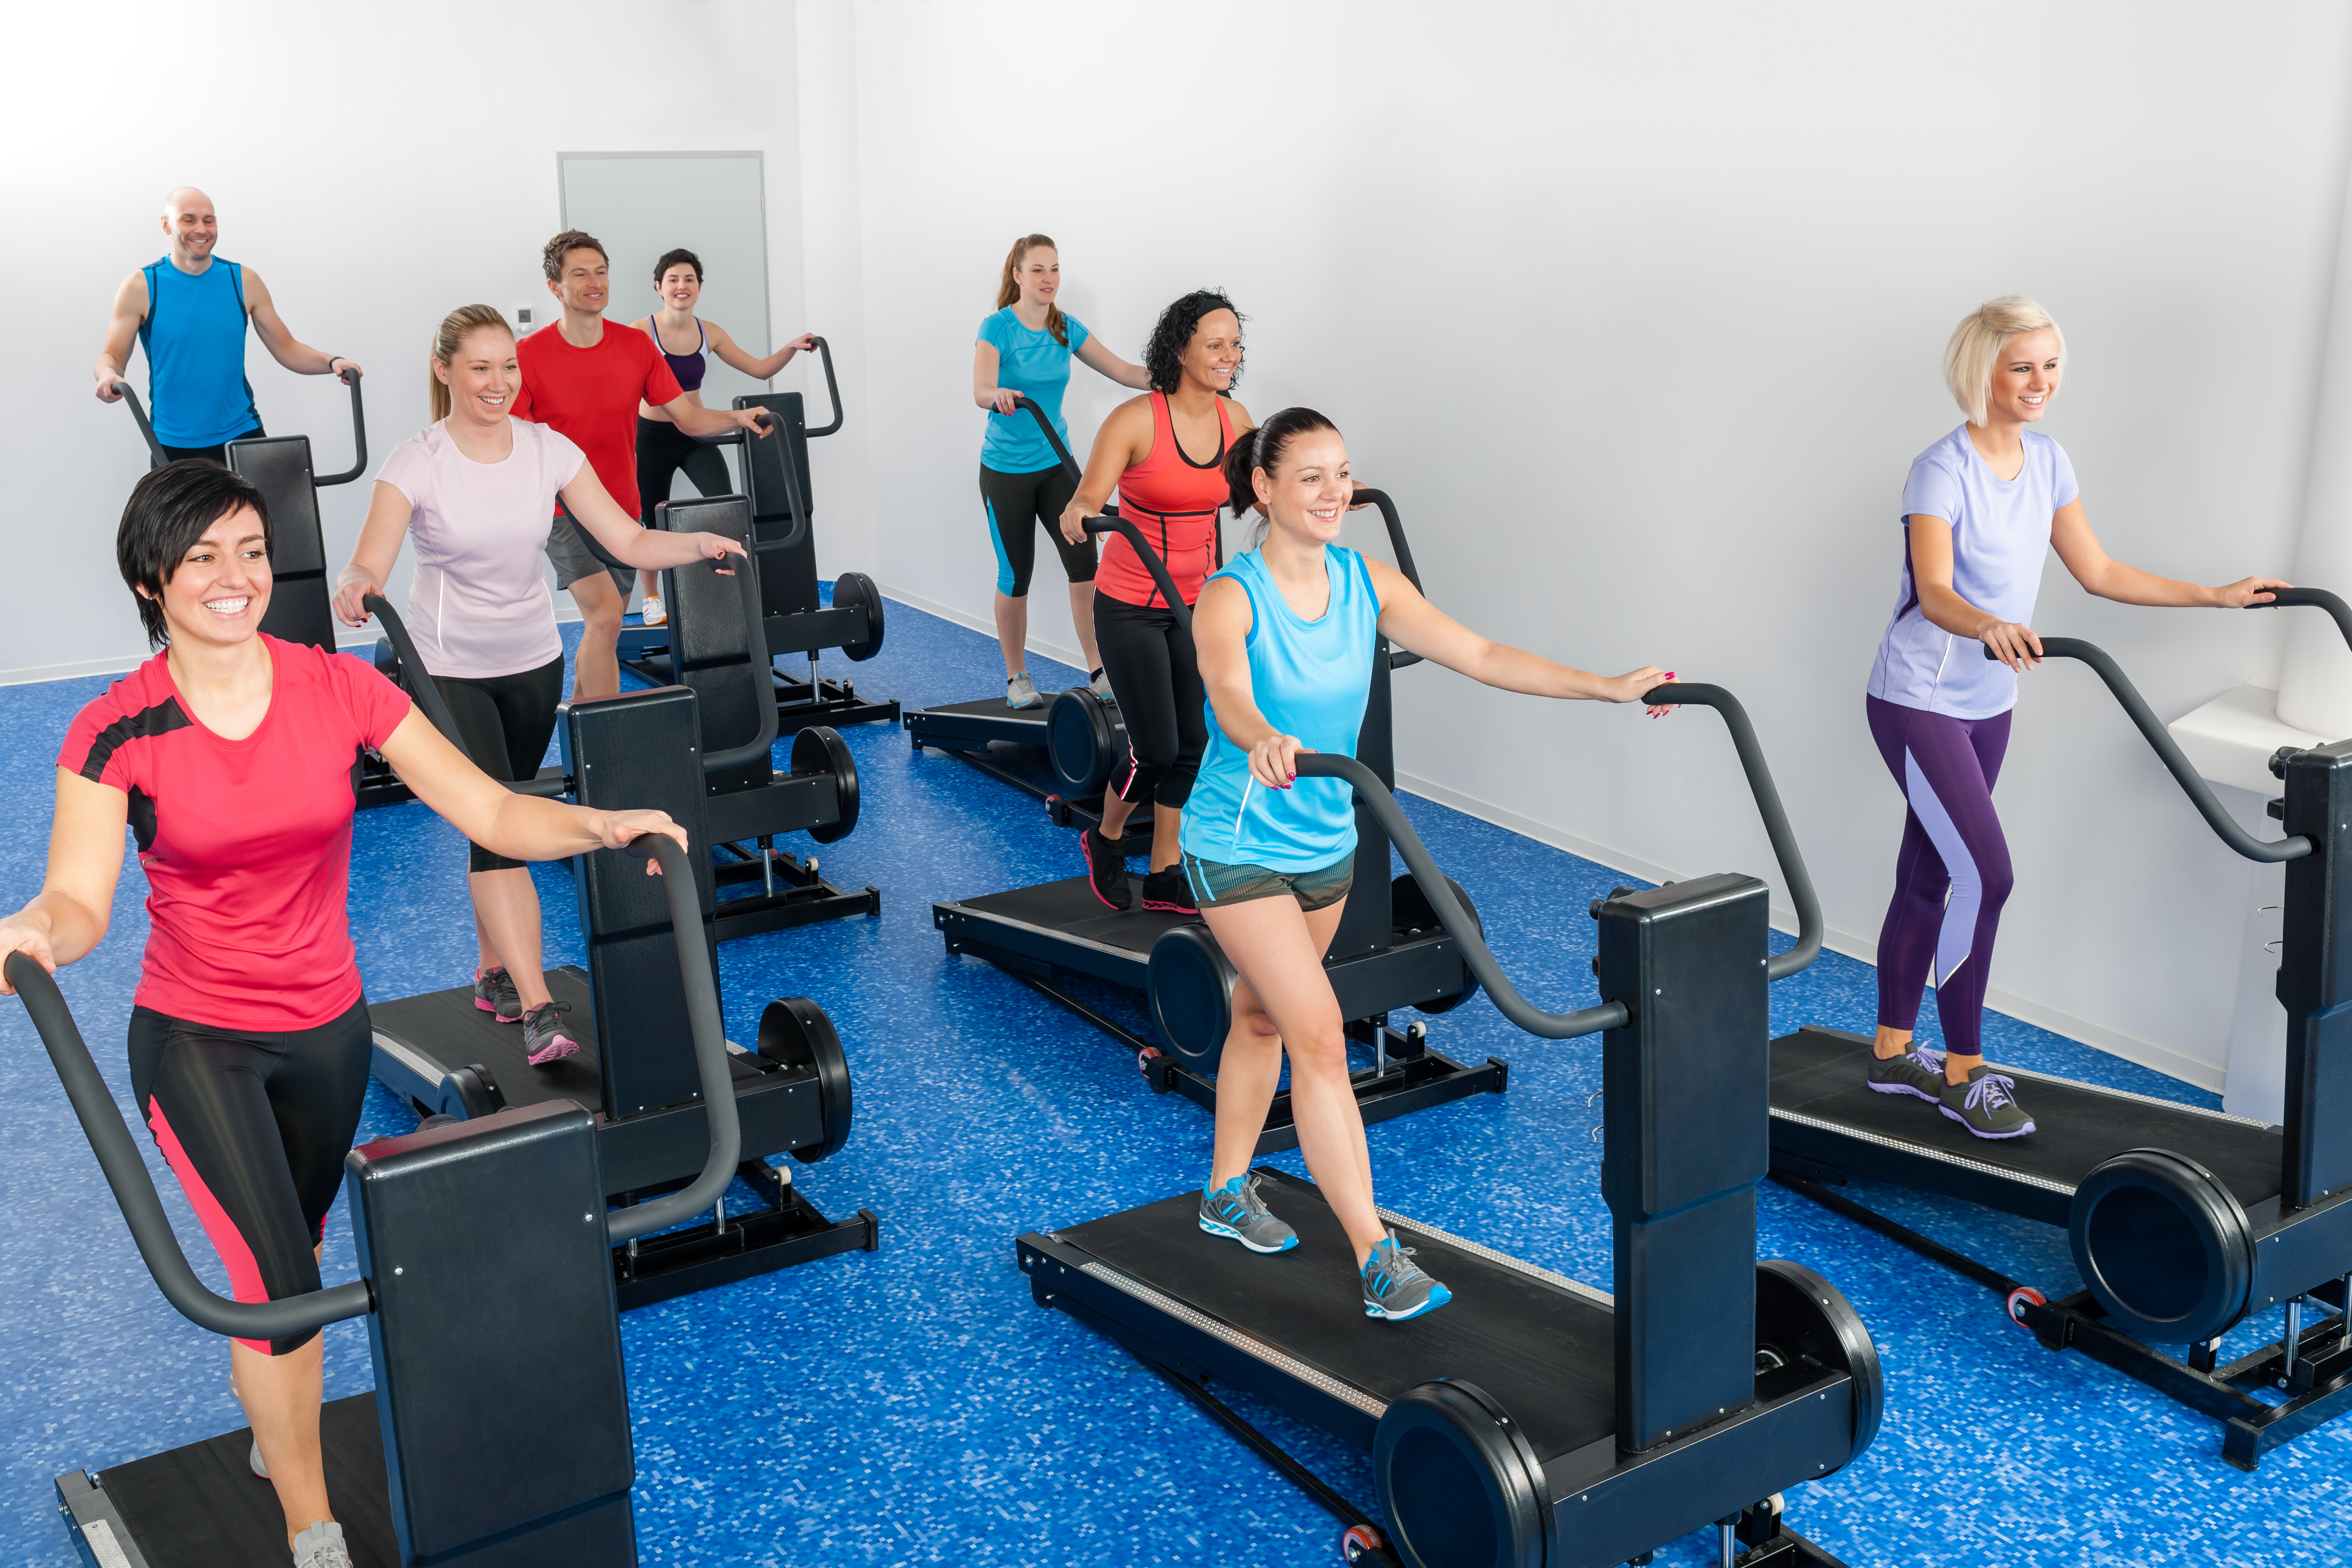 Help! We’re Caught on a Nonprofit Event Treadmill